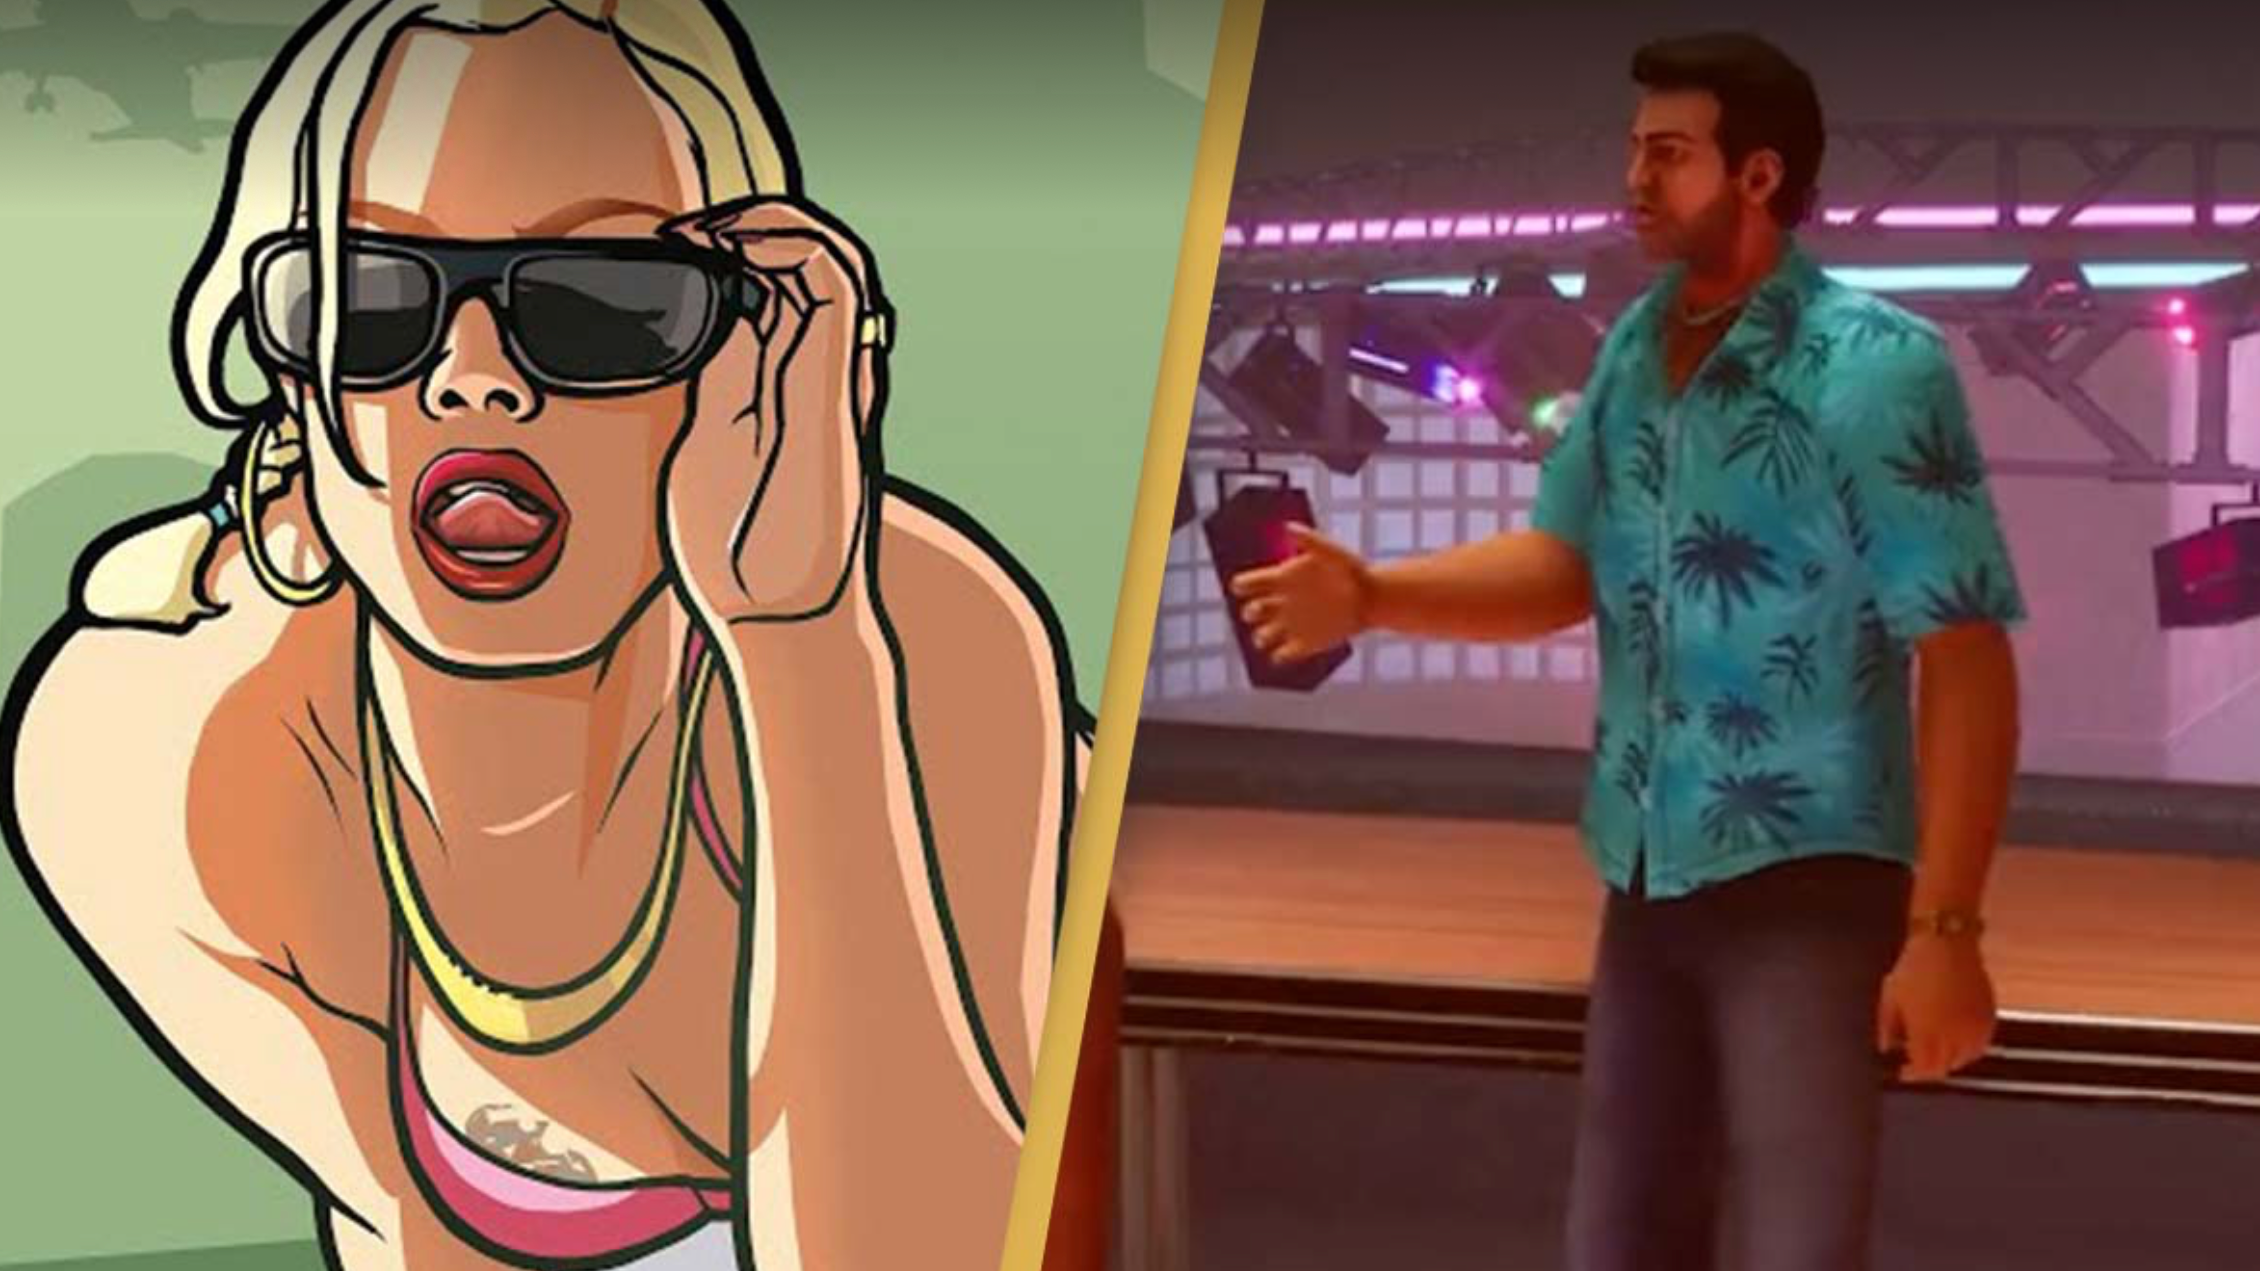 Netflix released Grand Theft Auto trilogy – Vice City, San Andreas, and GTA  III